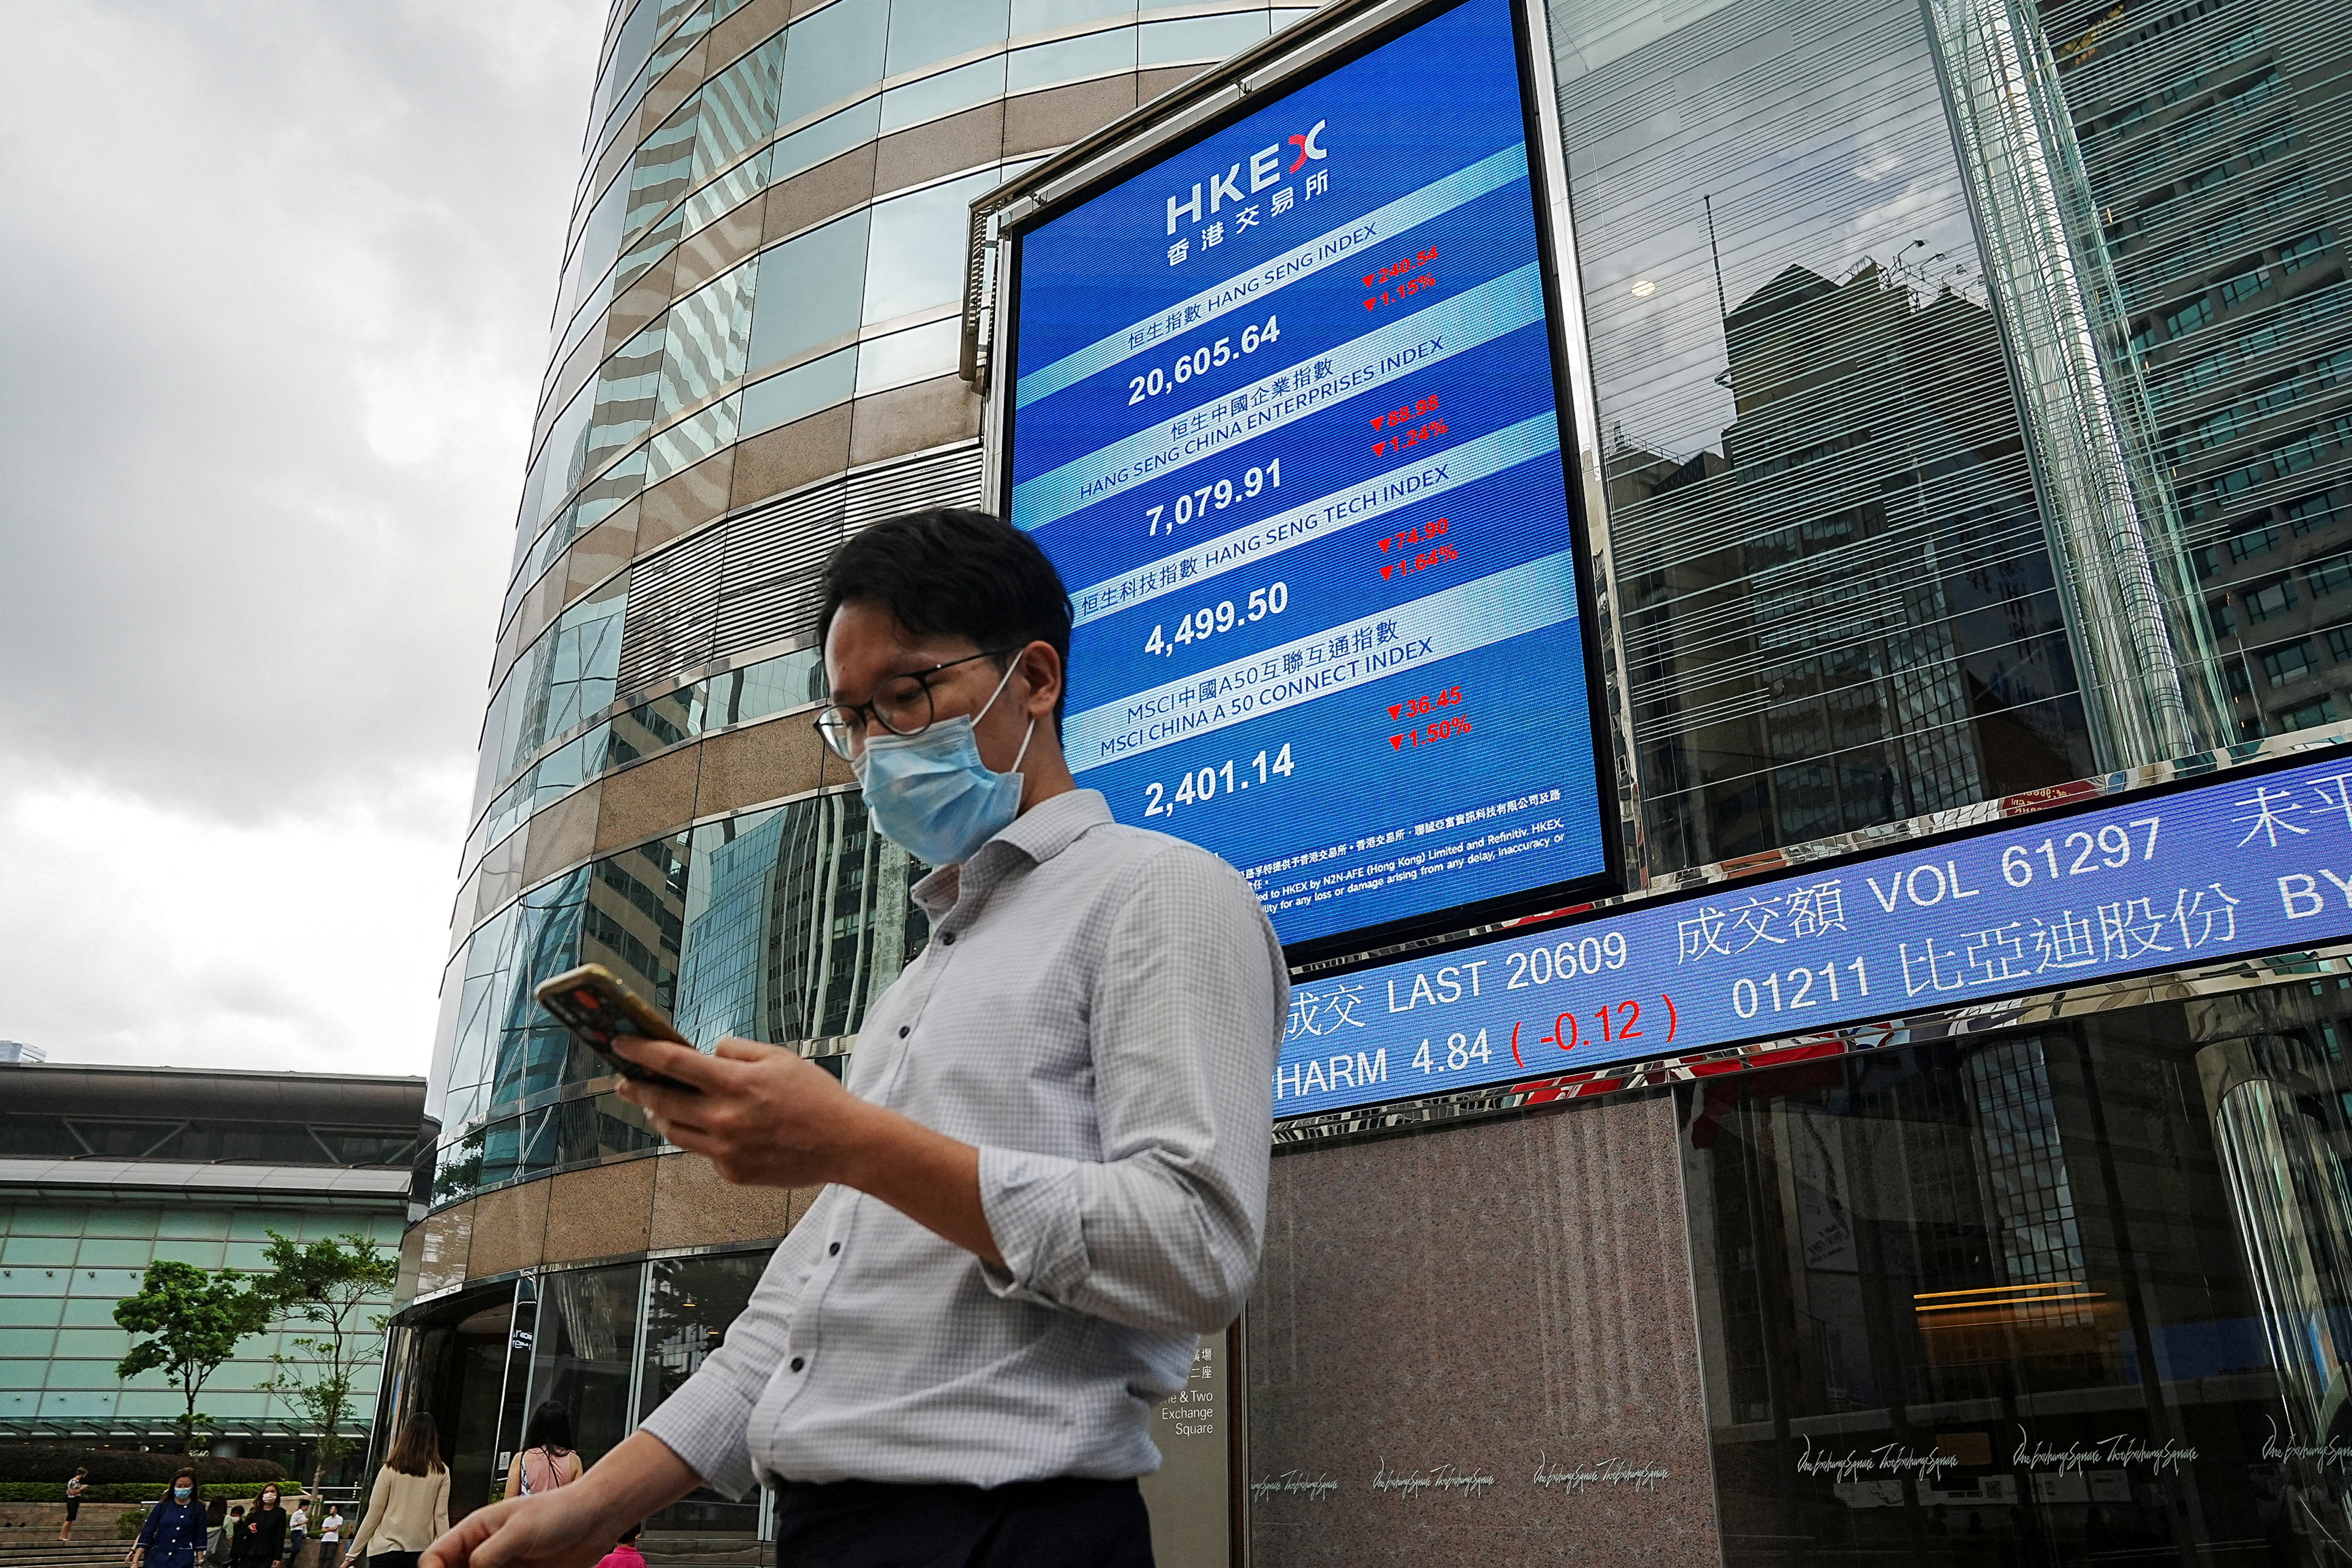 HSBC, AIA, Country Garden lead decline Hong Kong stocks as Hang Seng Index hits lowest level since December | South China Morning Post